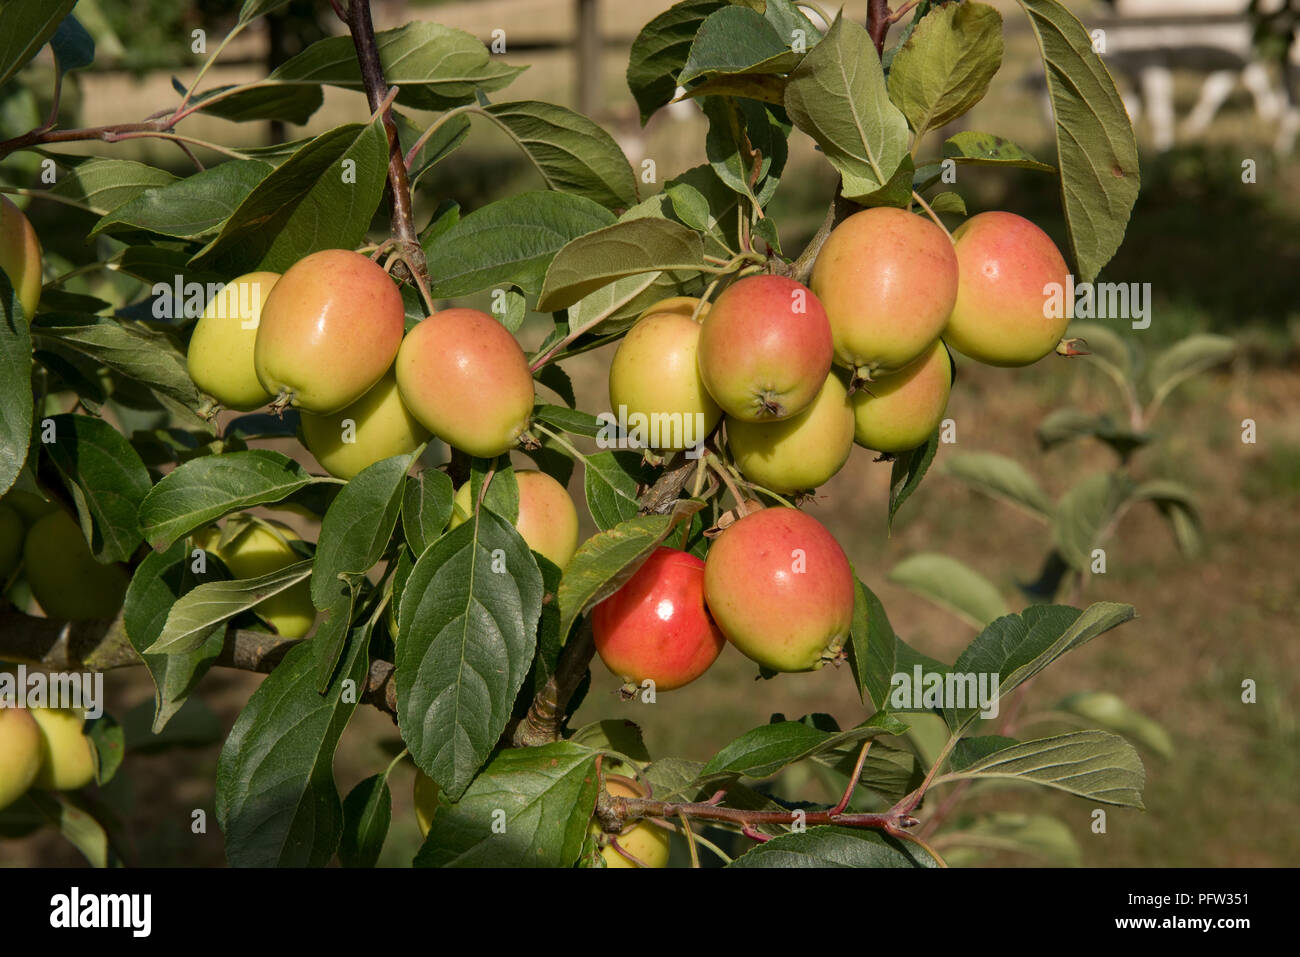 Crab apple, Malus 'John Downie', with red, orange-yellow ovoid fruit on the tree, Berkshire, August Stock Photo